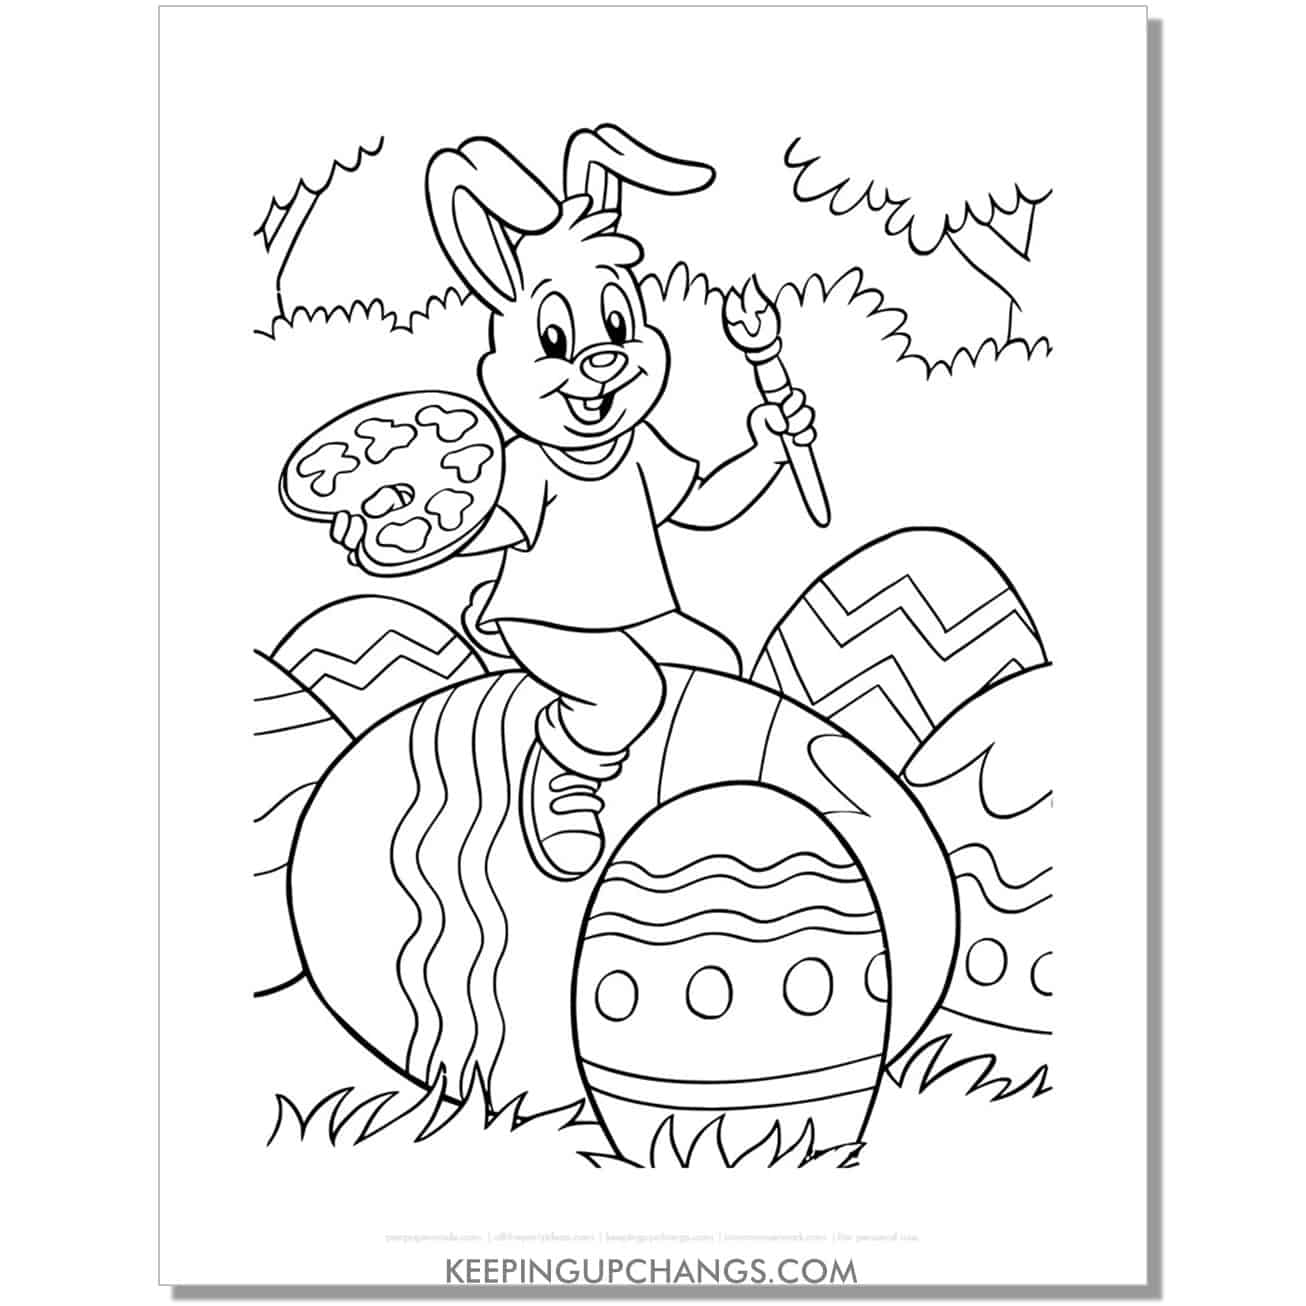 easter bunny holding paint brush sitting on egg coloring page, sheet.